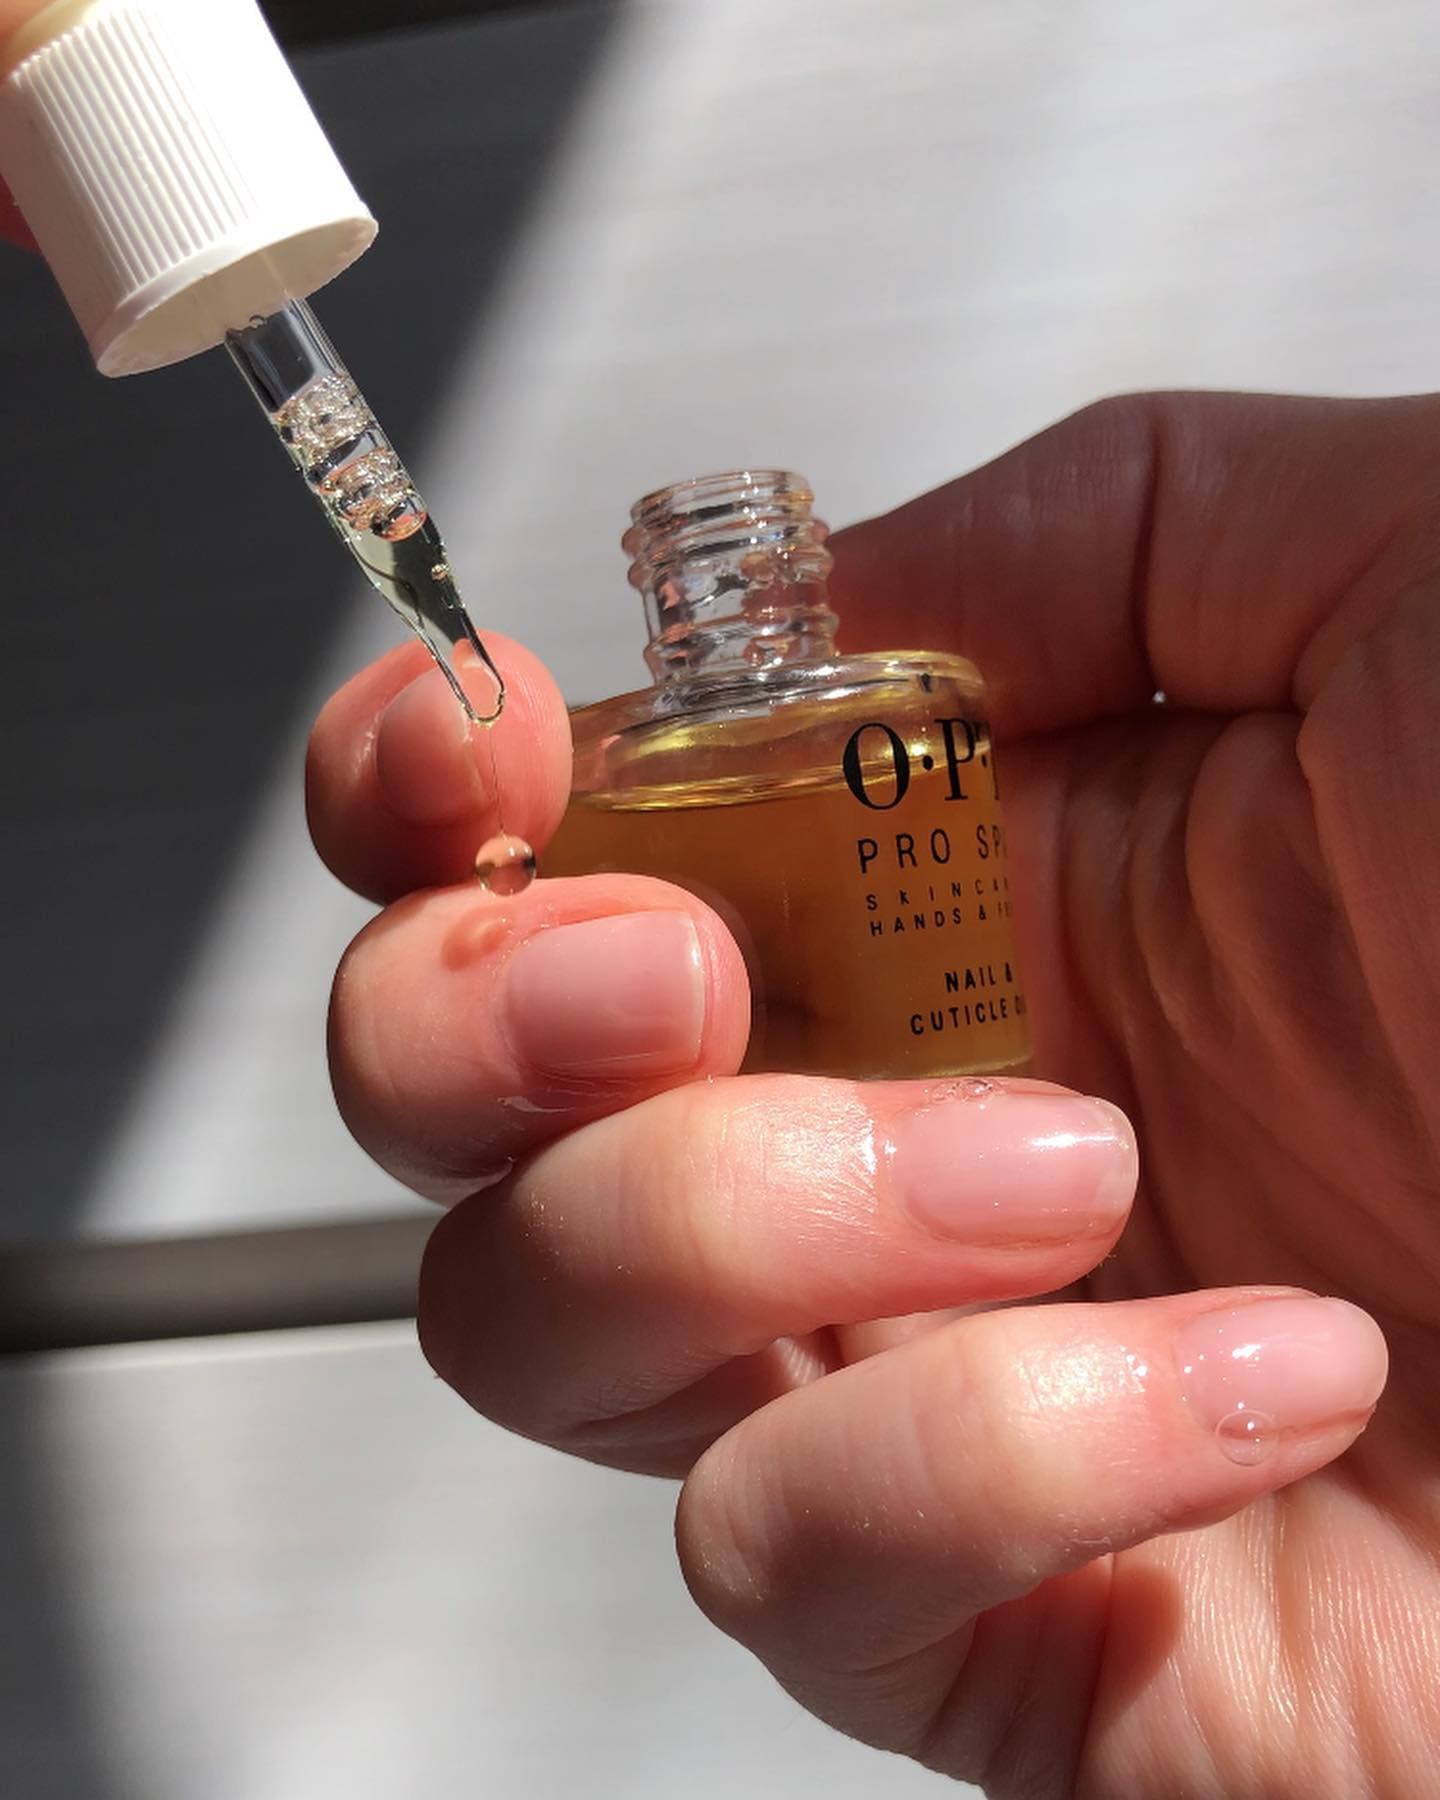 Treat your dry cuticles with this nail and cuticle oil from OPI.